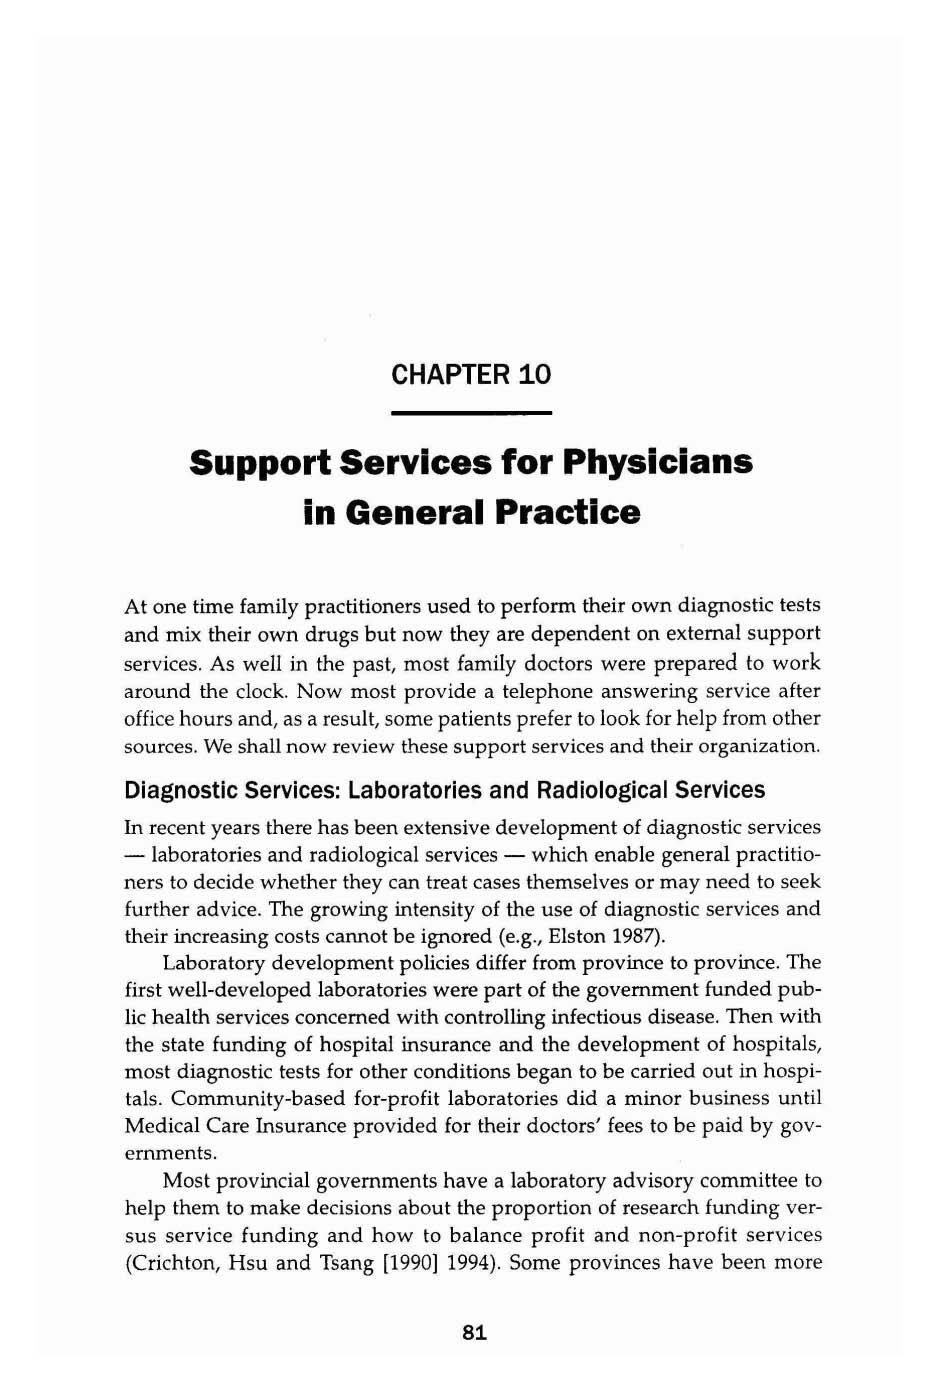 CHAPTER 10 Support Services for Physicians in General Practice At one time family practitioners used to perform their own diagnostic tests and mix their own drugs but now they are dependent on